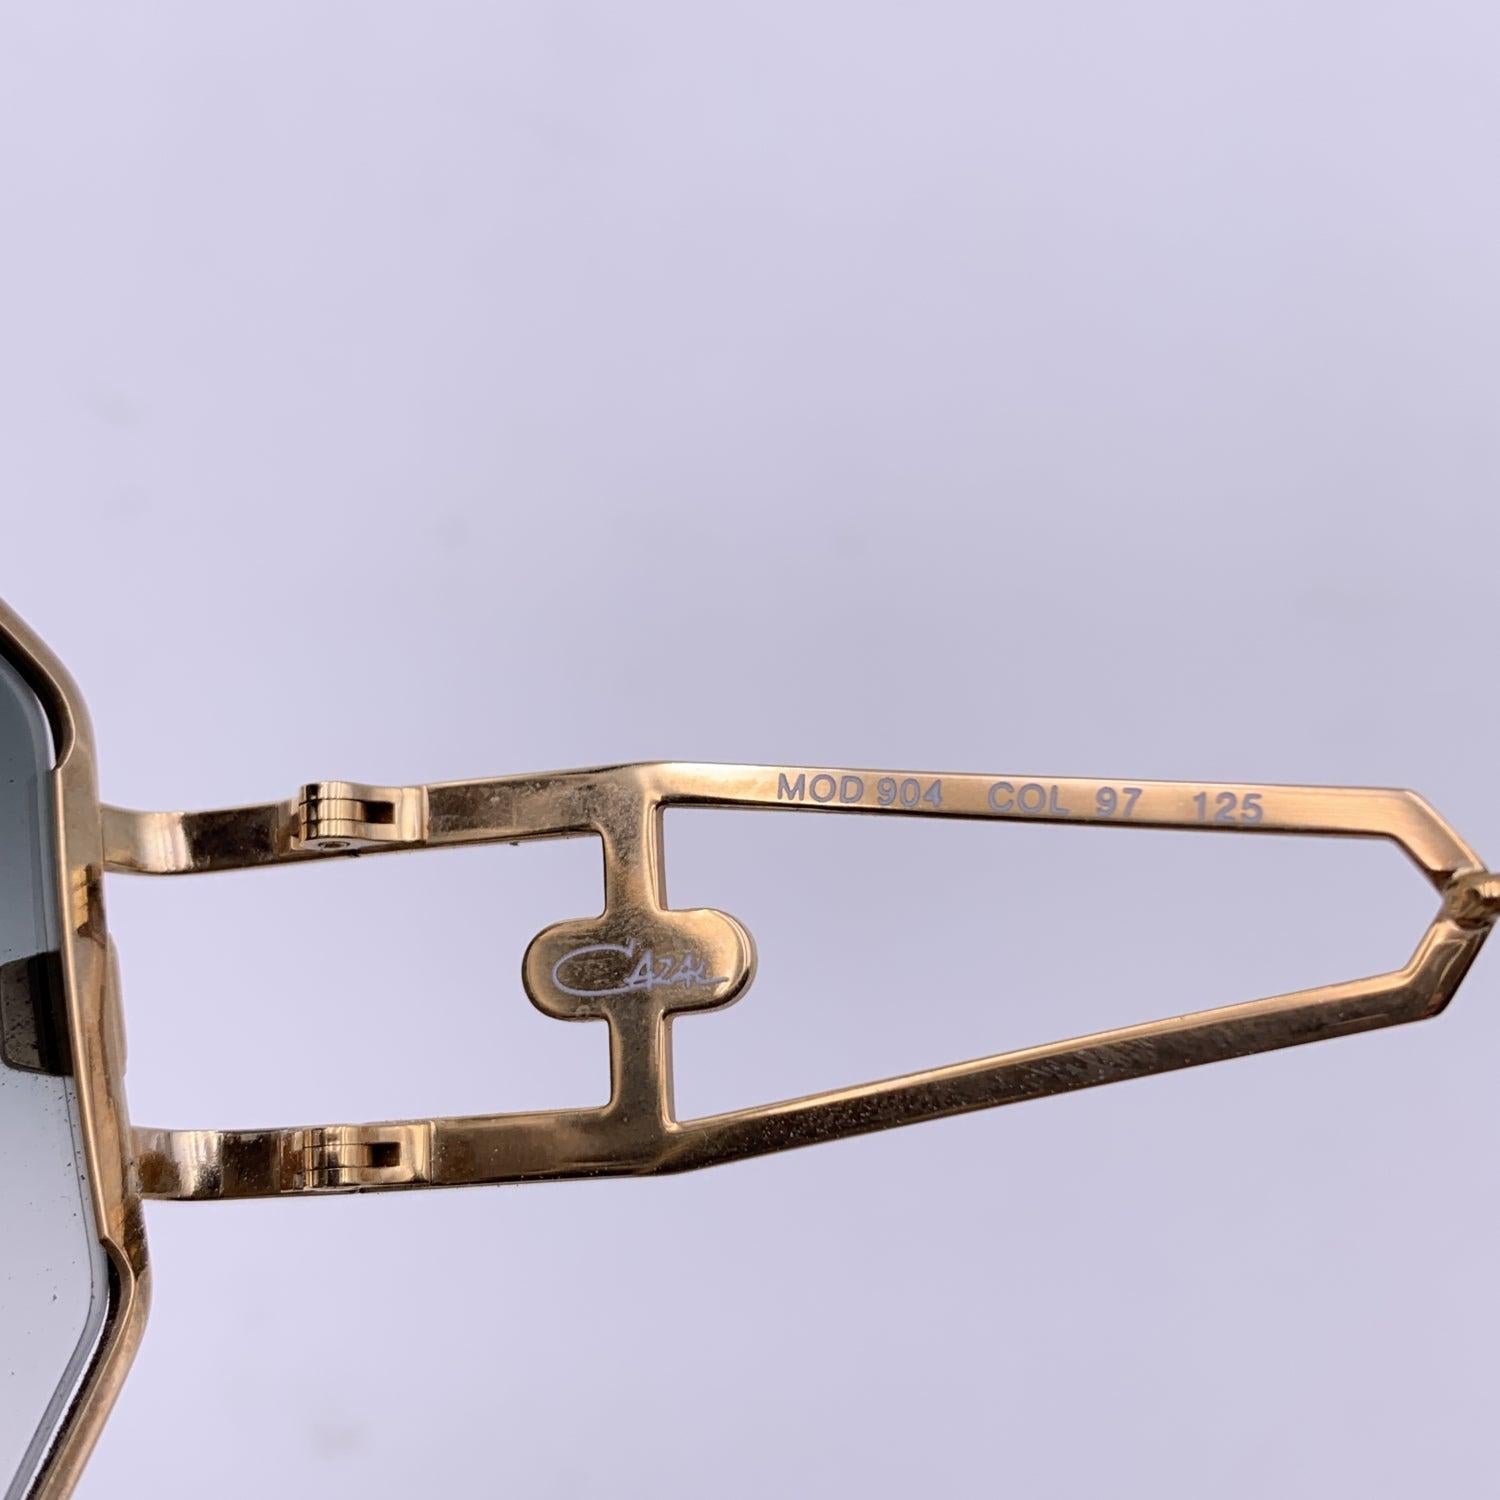 Cazal Gold Metal Sunglasses Mod. 904 Col 97 125 mm with Extra Lens For Sale 2